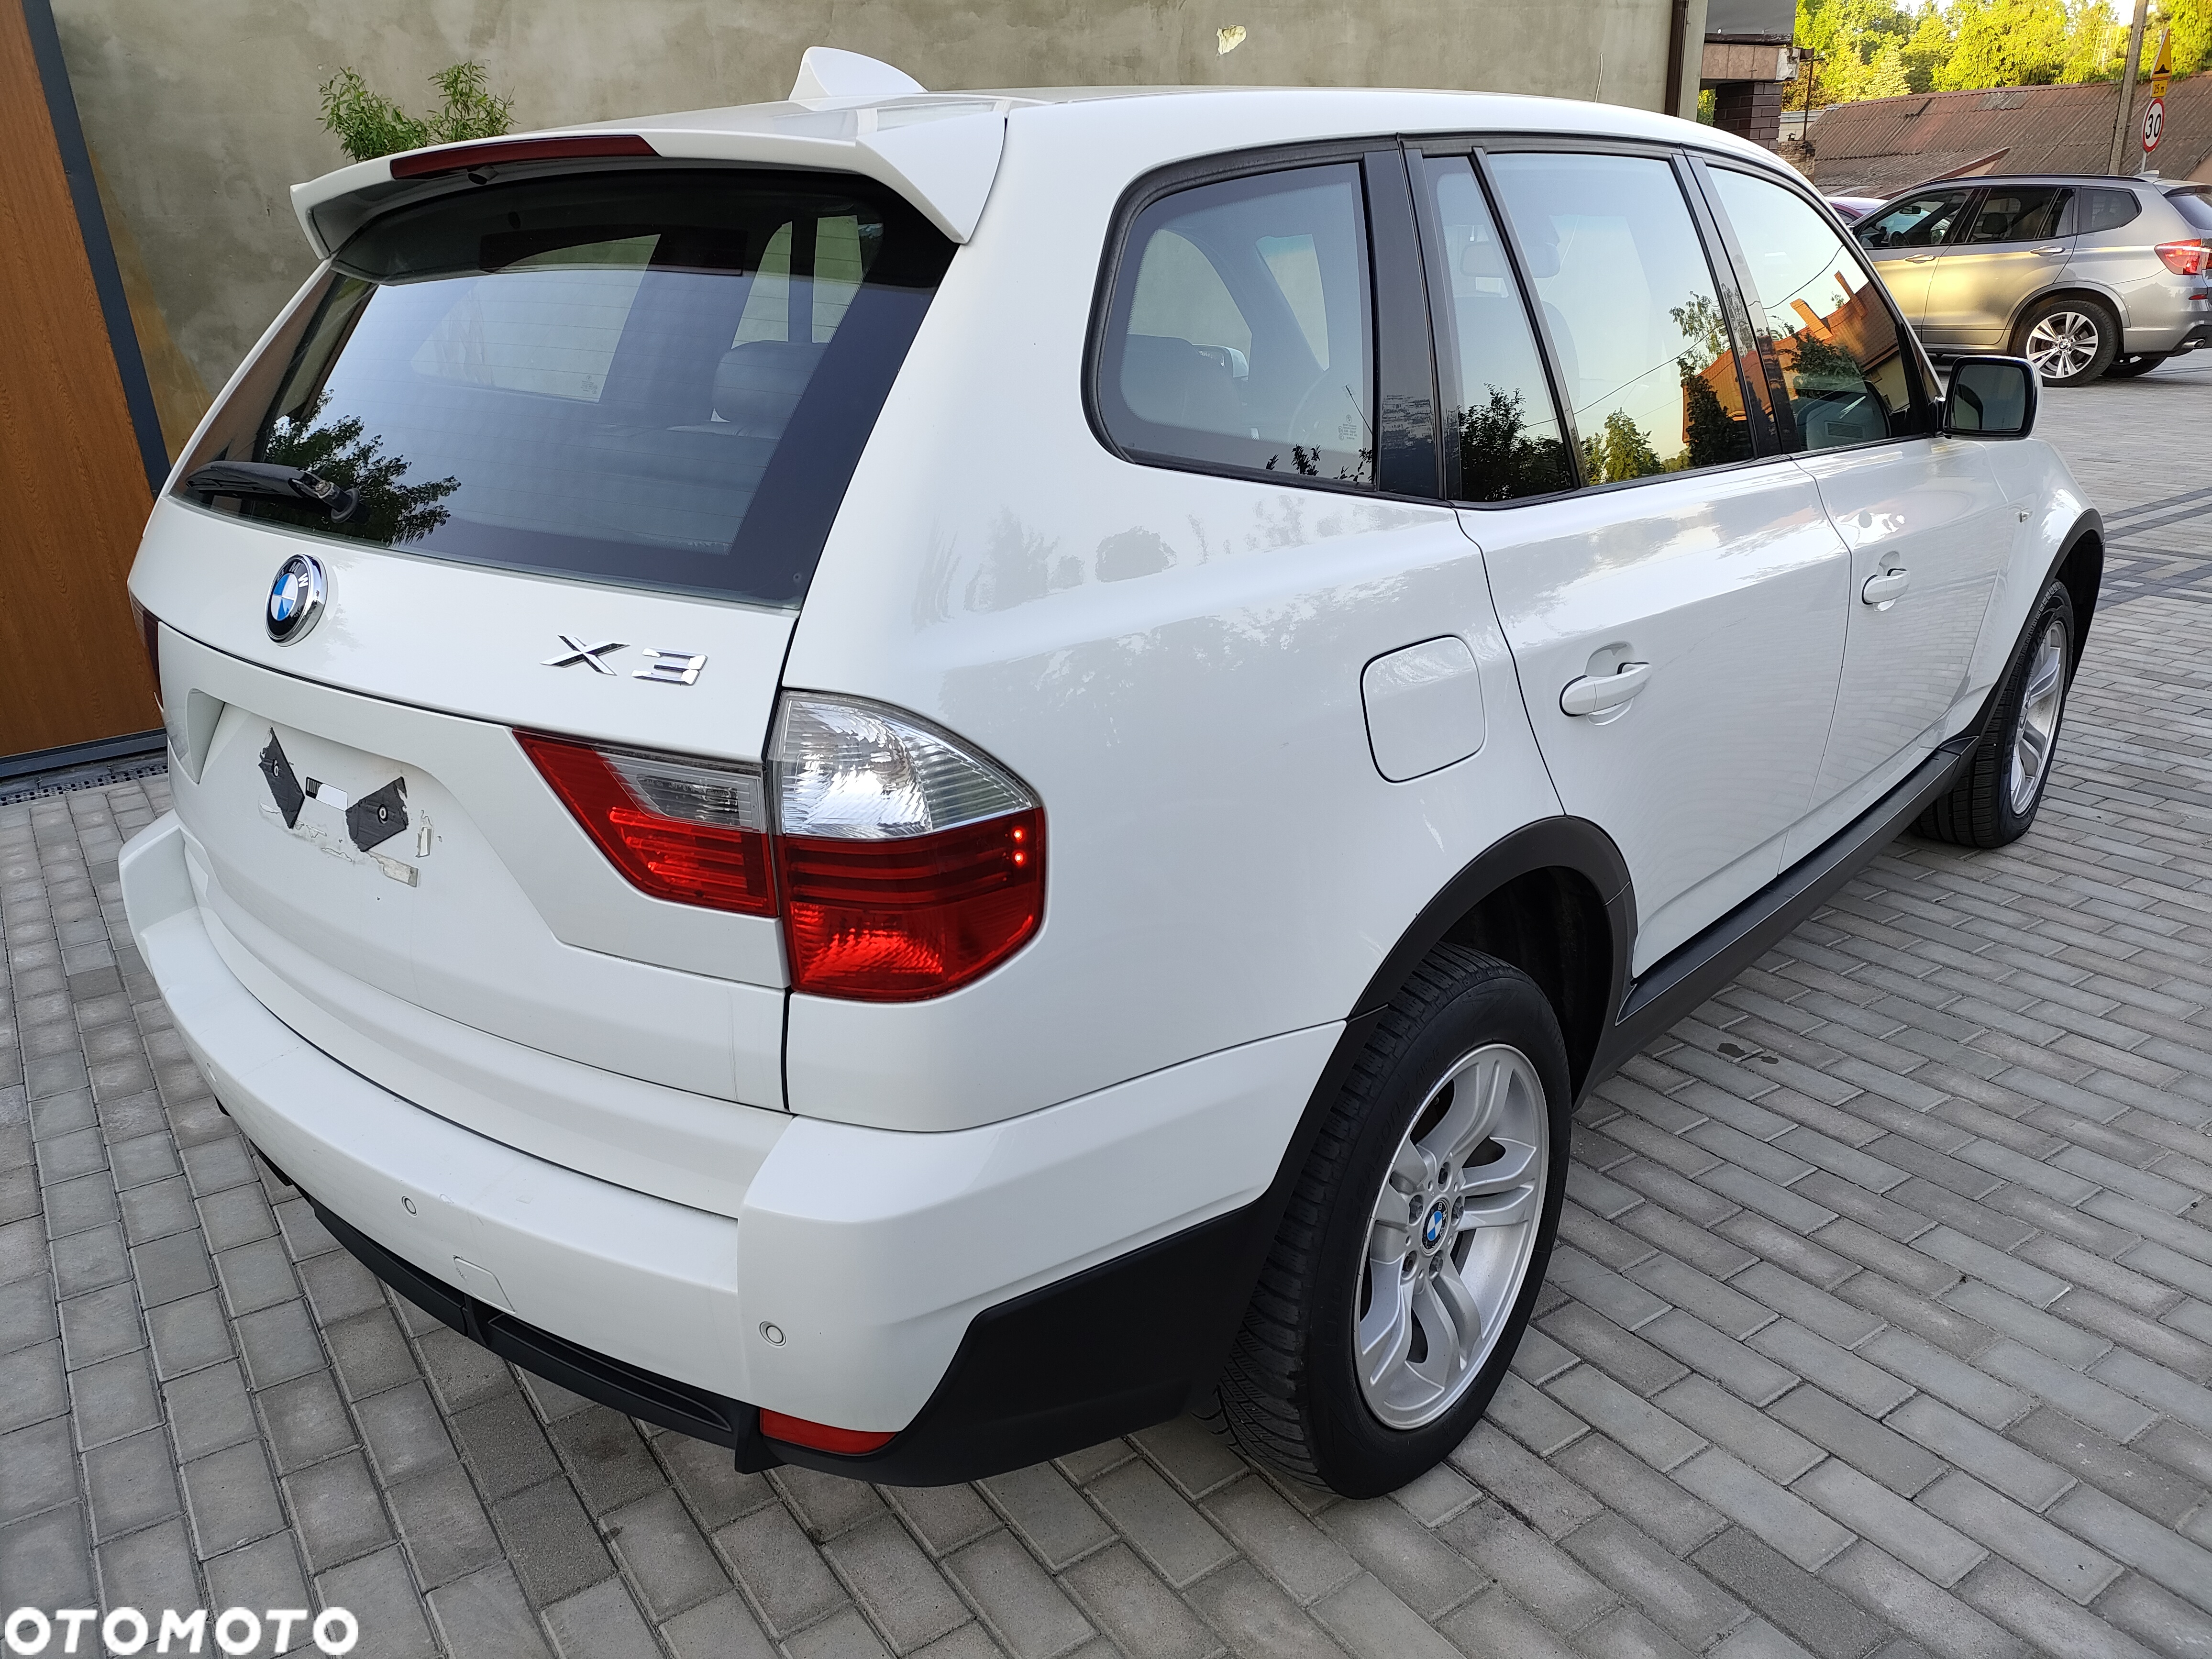 BMW X3 xDrive20d Edition Exclusive - 3